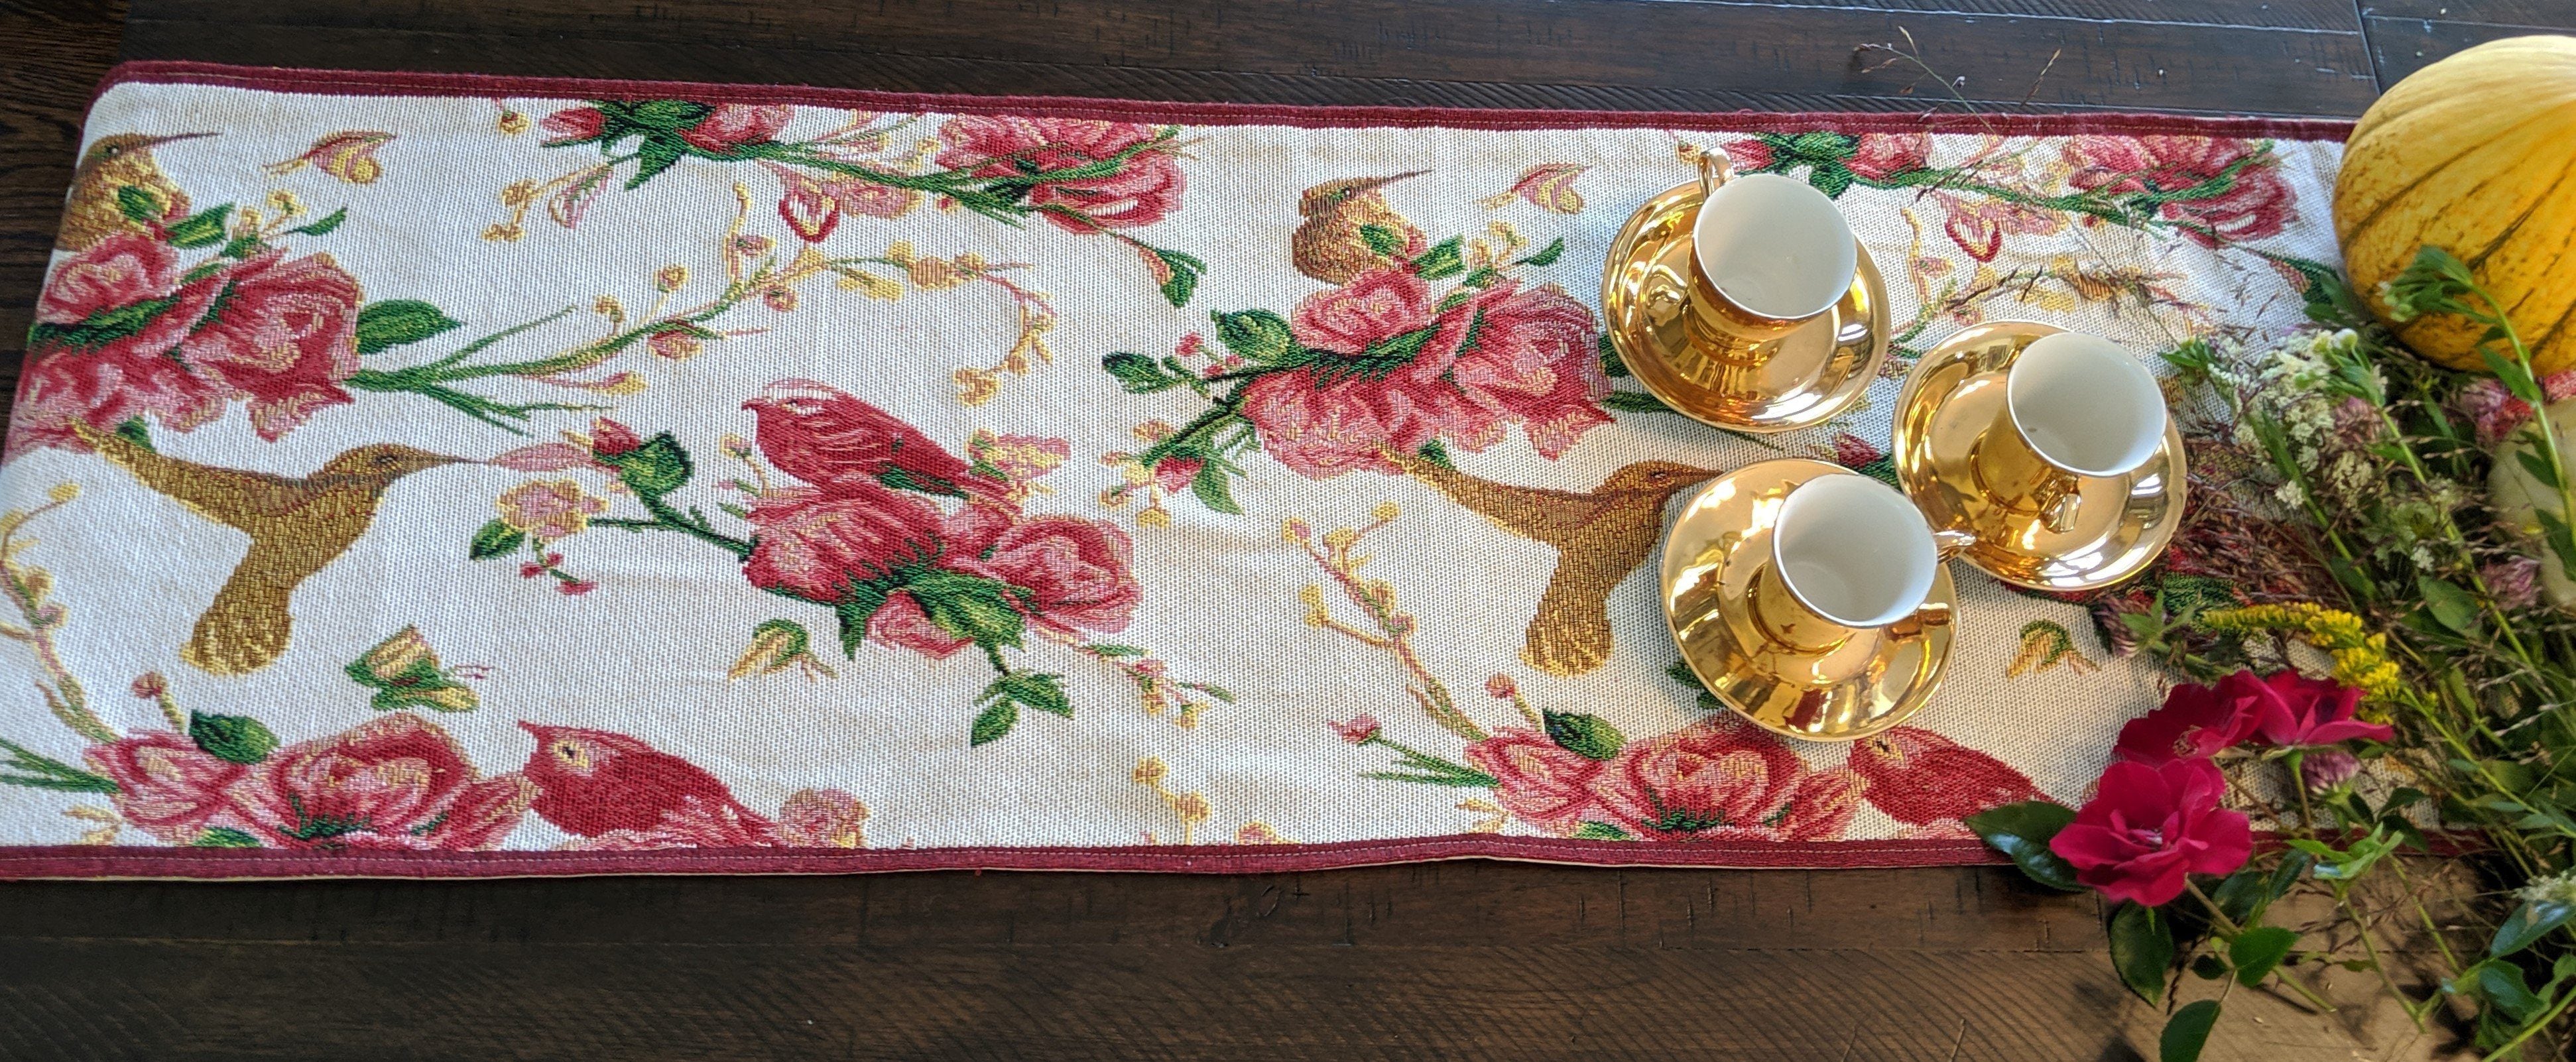 Tache Floral Red Roses Hummingbirds Ivory Woven Tapestry Table Runner (18109) - Tache Home Fashion